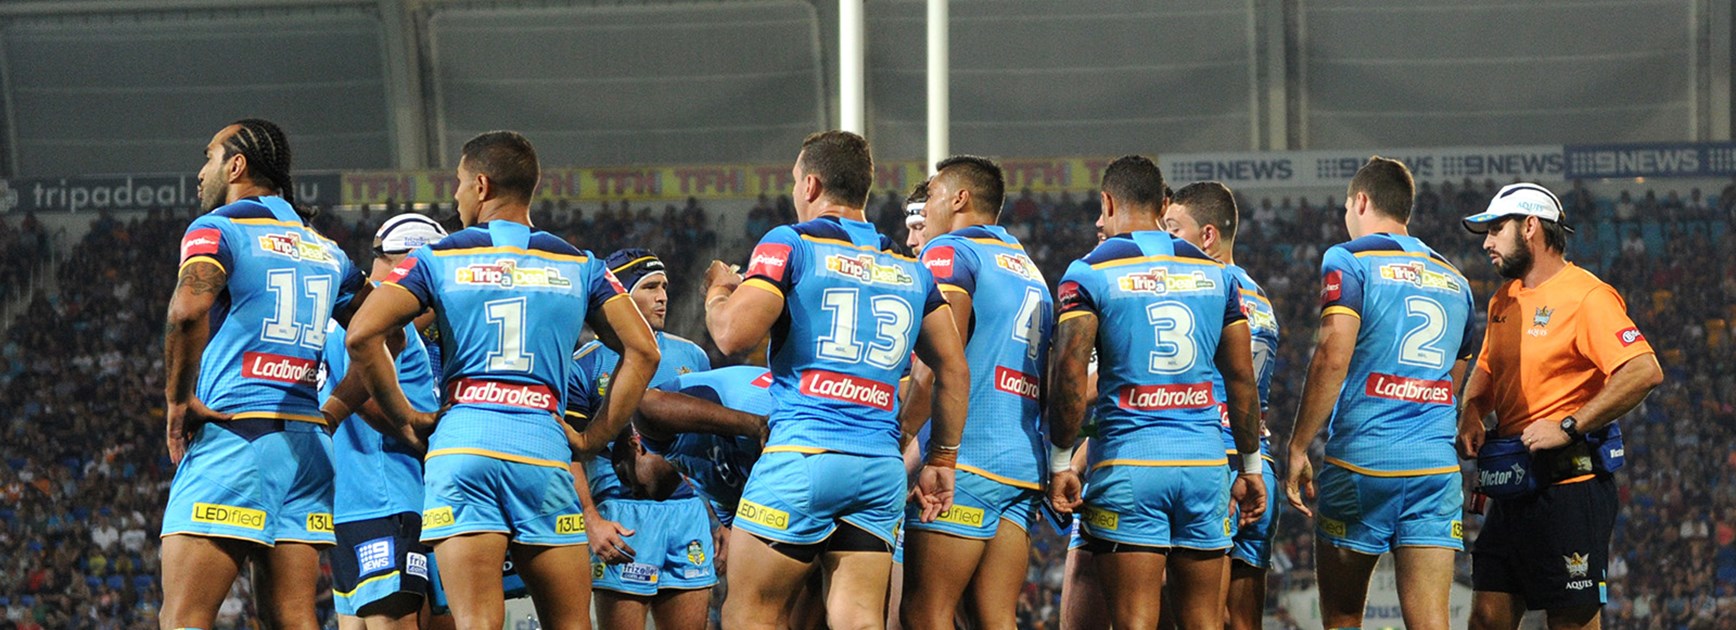 Gold Coast Titans regroup after conceding a try against the Broncos in Round 5 of the Telstra Premiership.